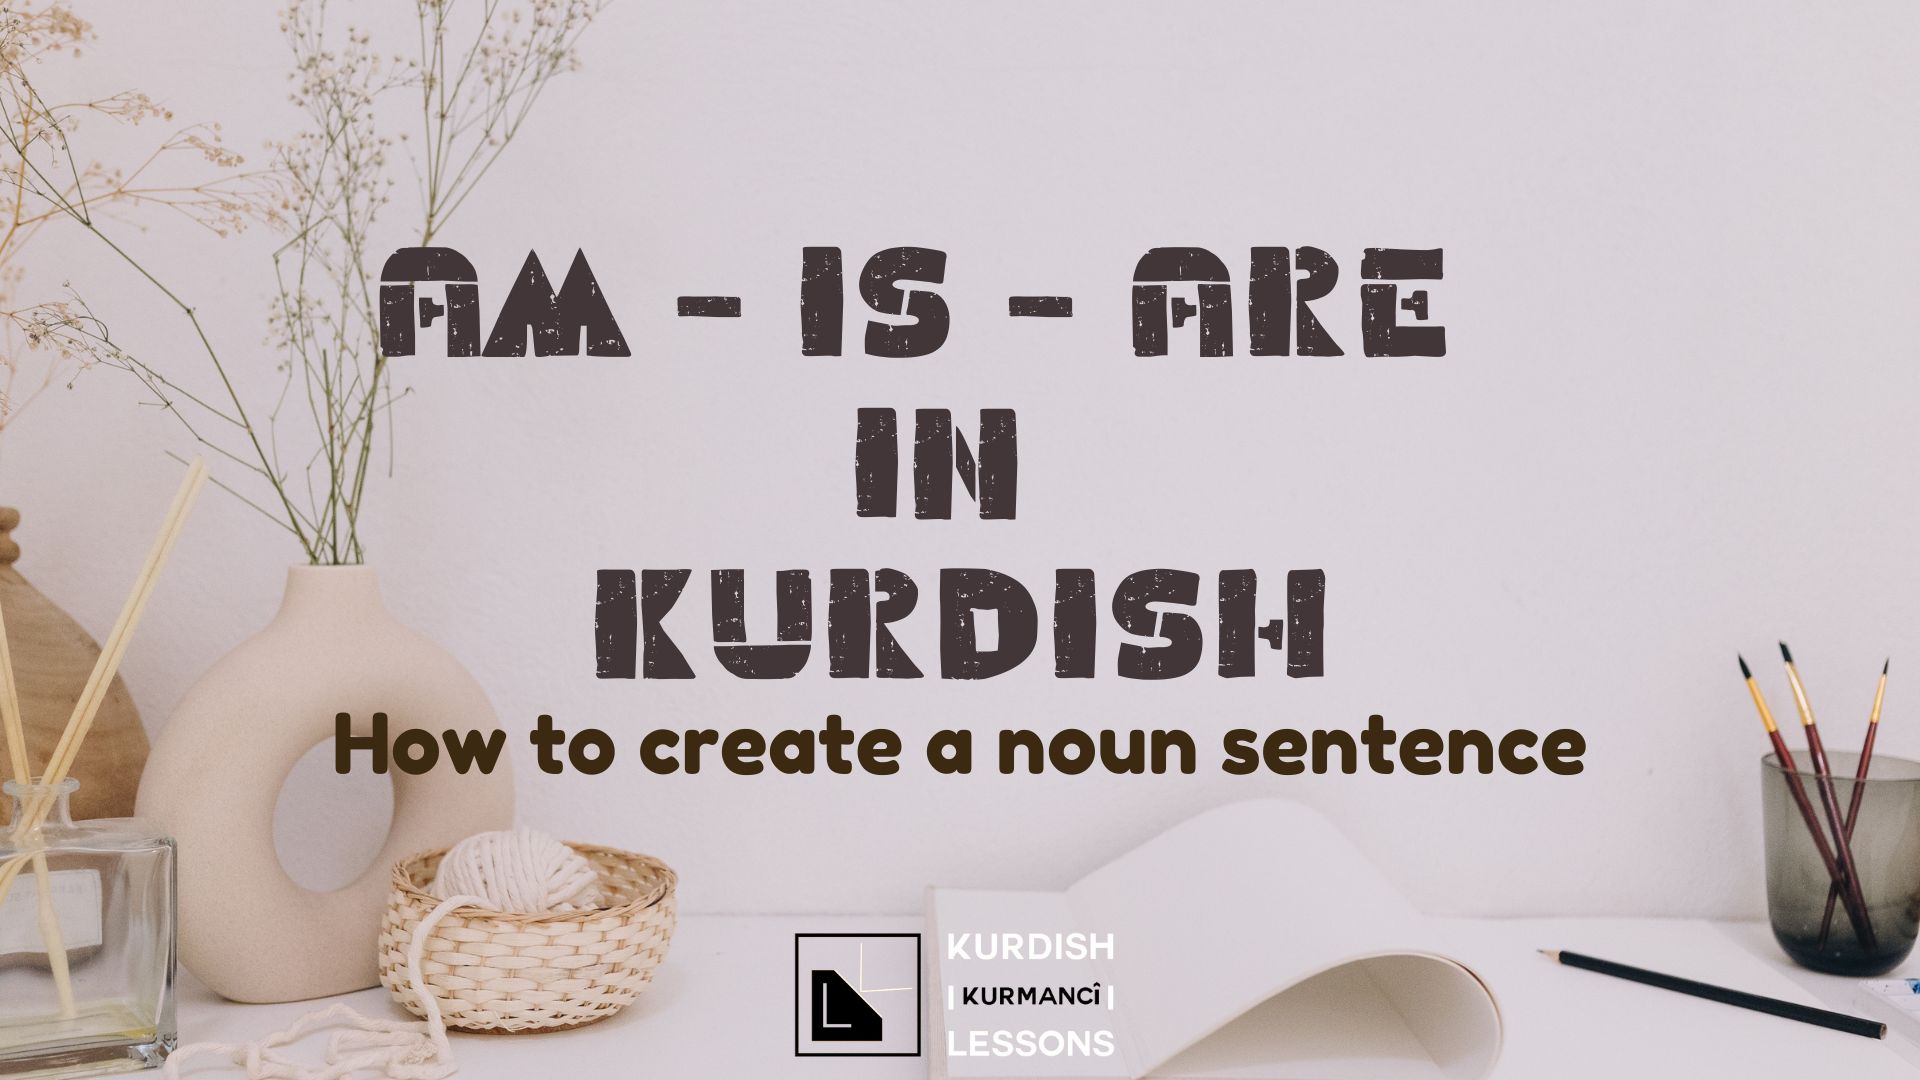 Am-is-are in Kurdish